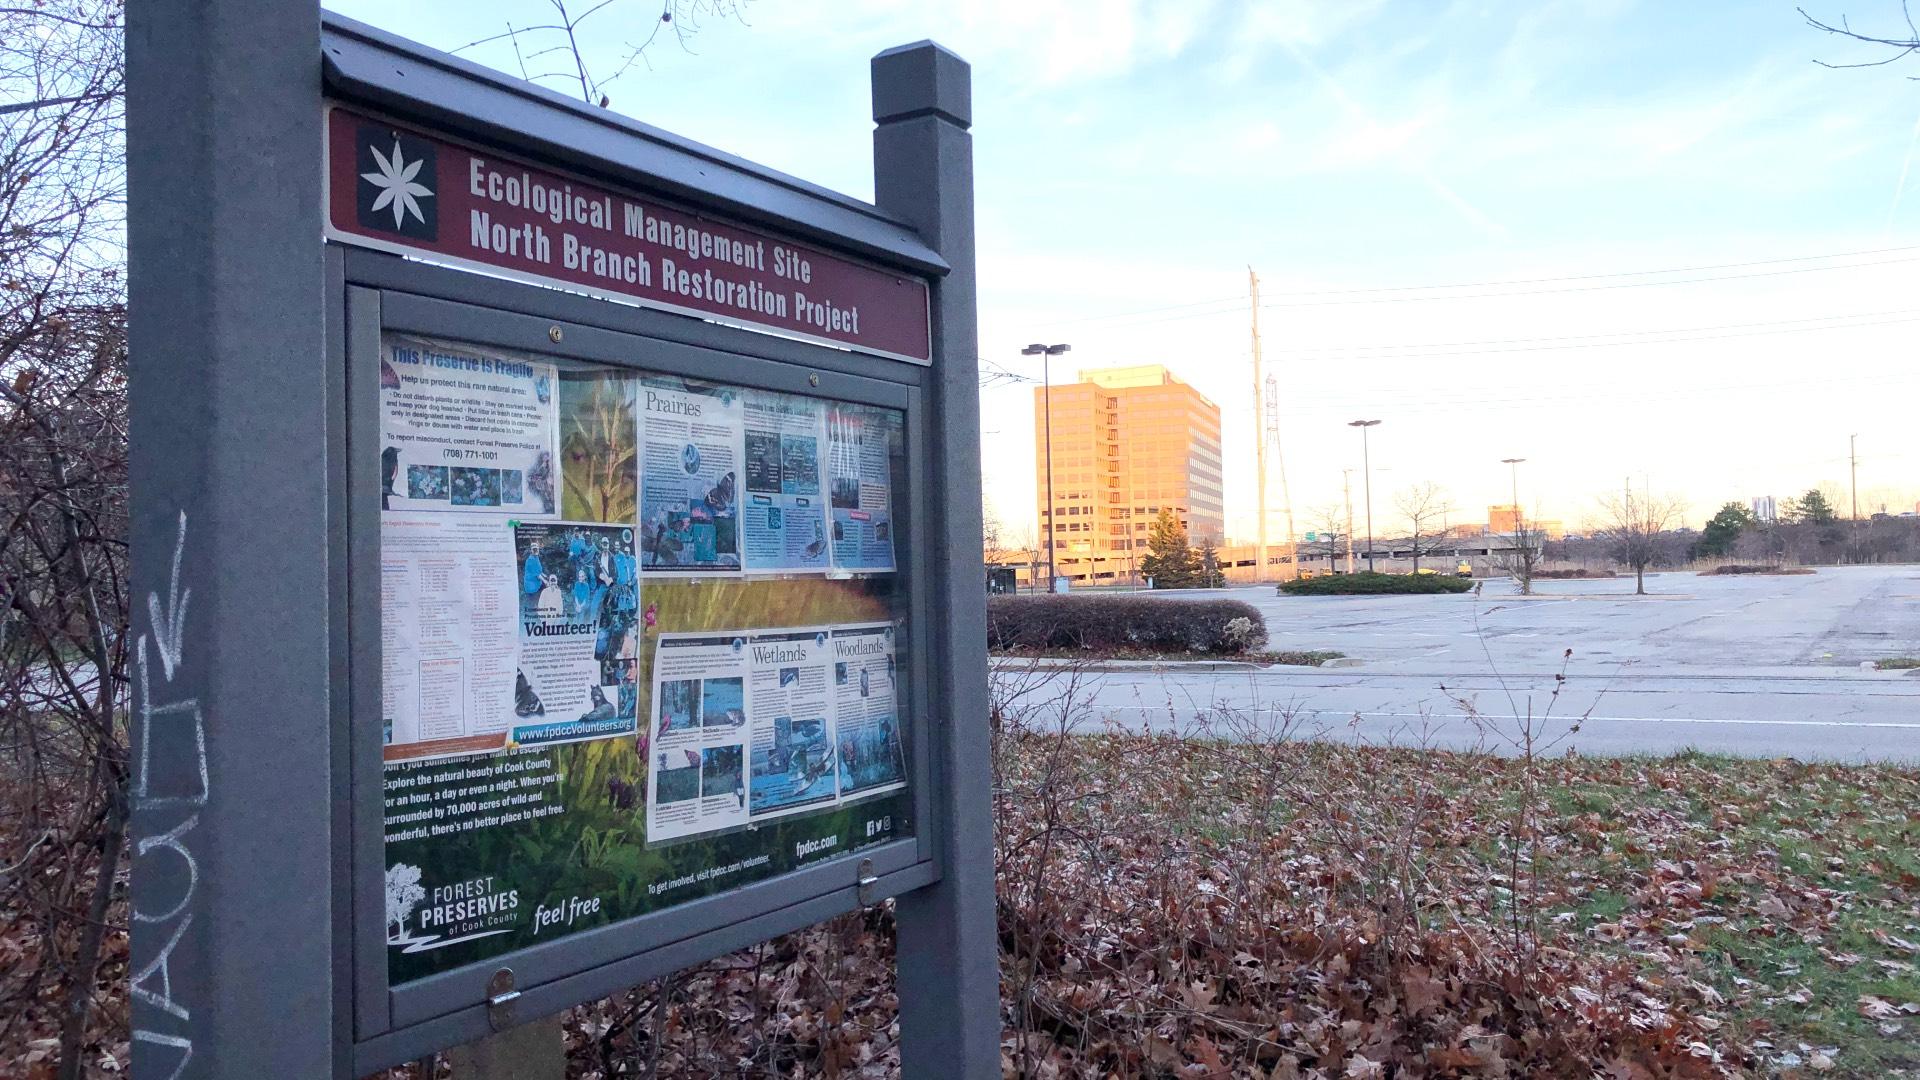 Harms Woods nature preserve sits opposite the proposed site of a Carvana auto vending machine in Skokie. (Patty Wetli / WTTW News)